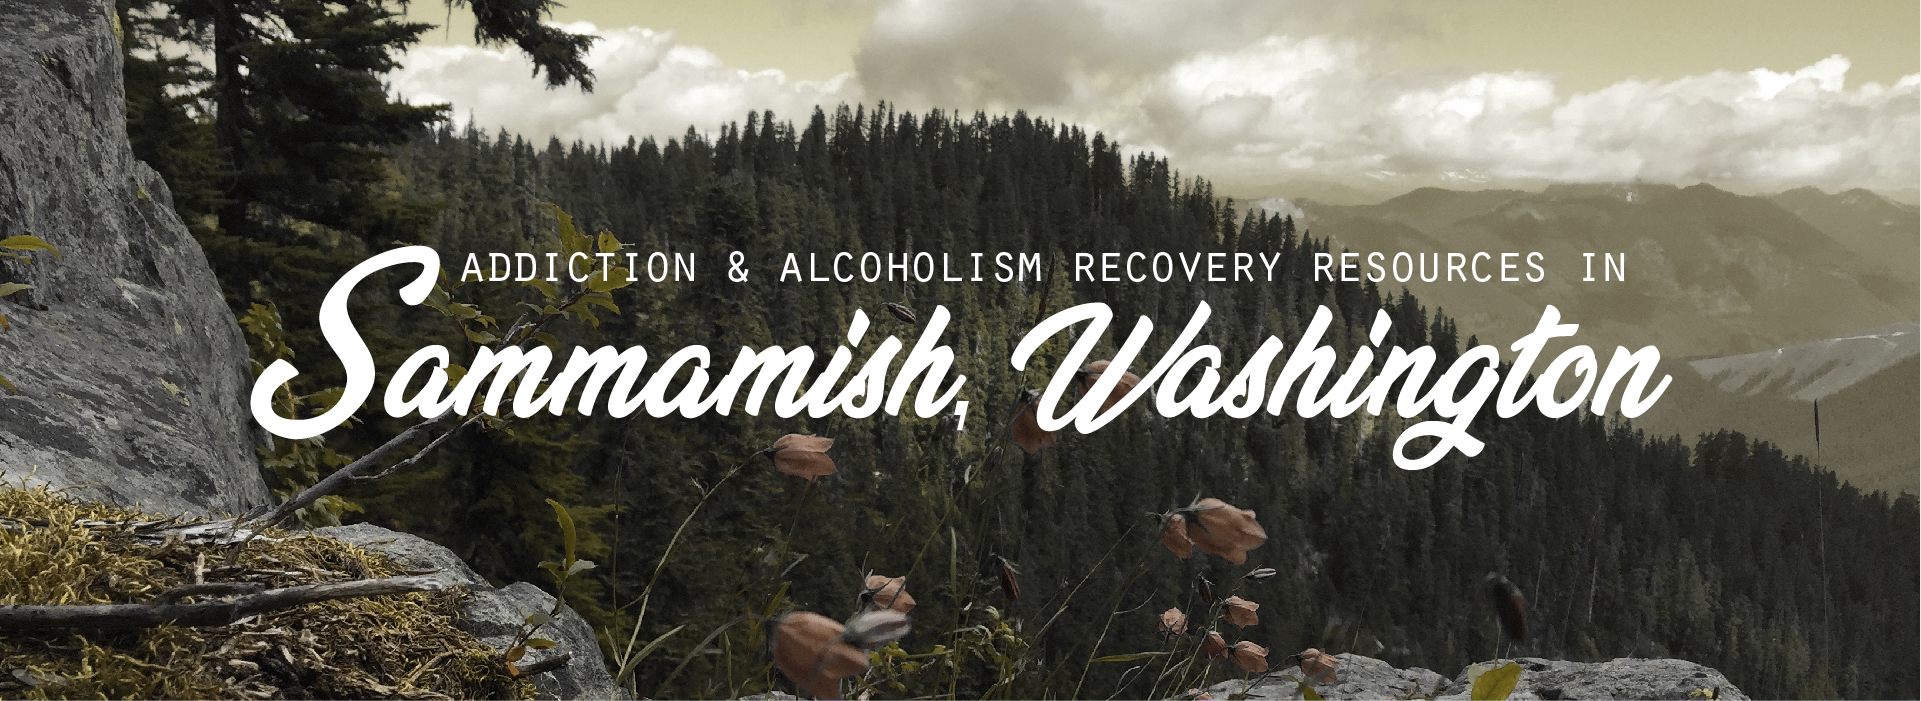 Addiction and alcoholism recovery resources in Sammamish, Washington